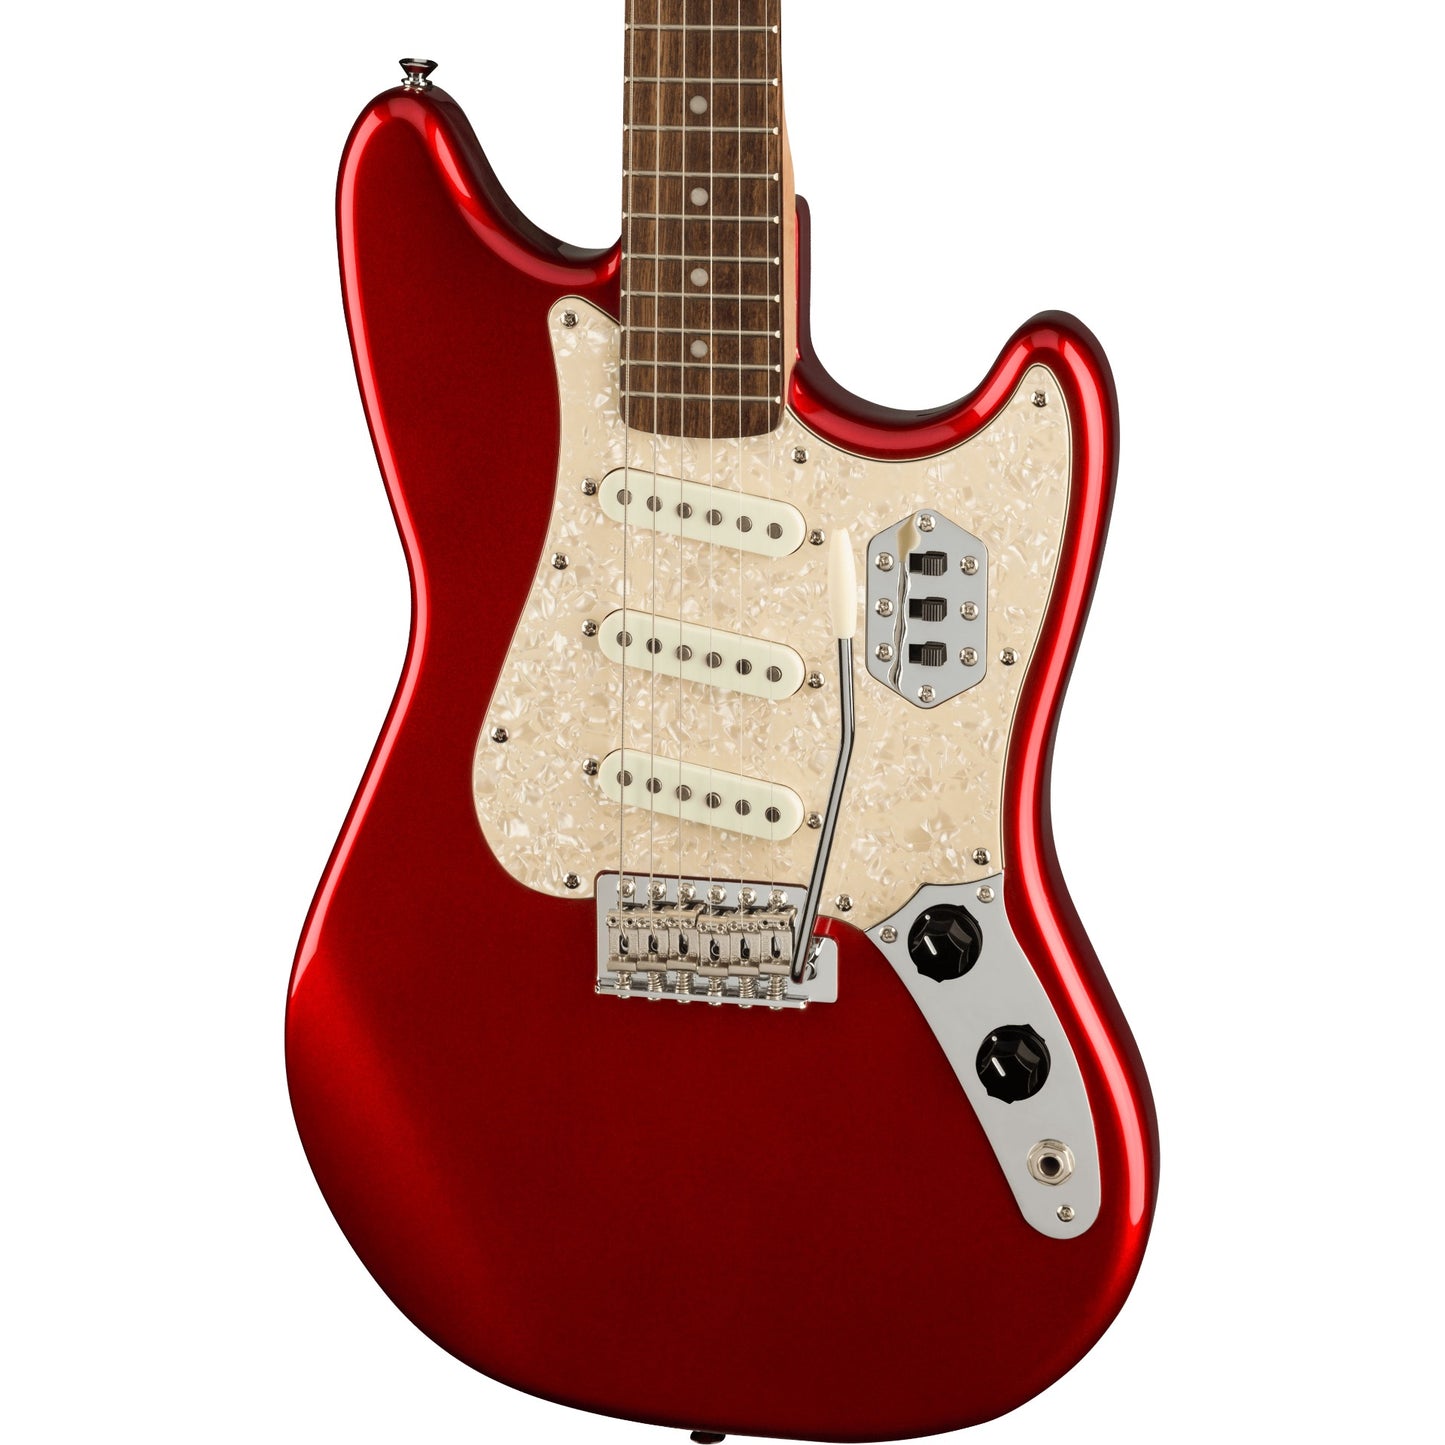 Fender Paranormal Cyclone Electric Guitar in Candy Apple Red